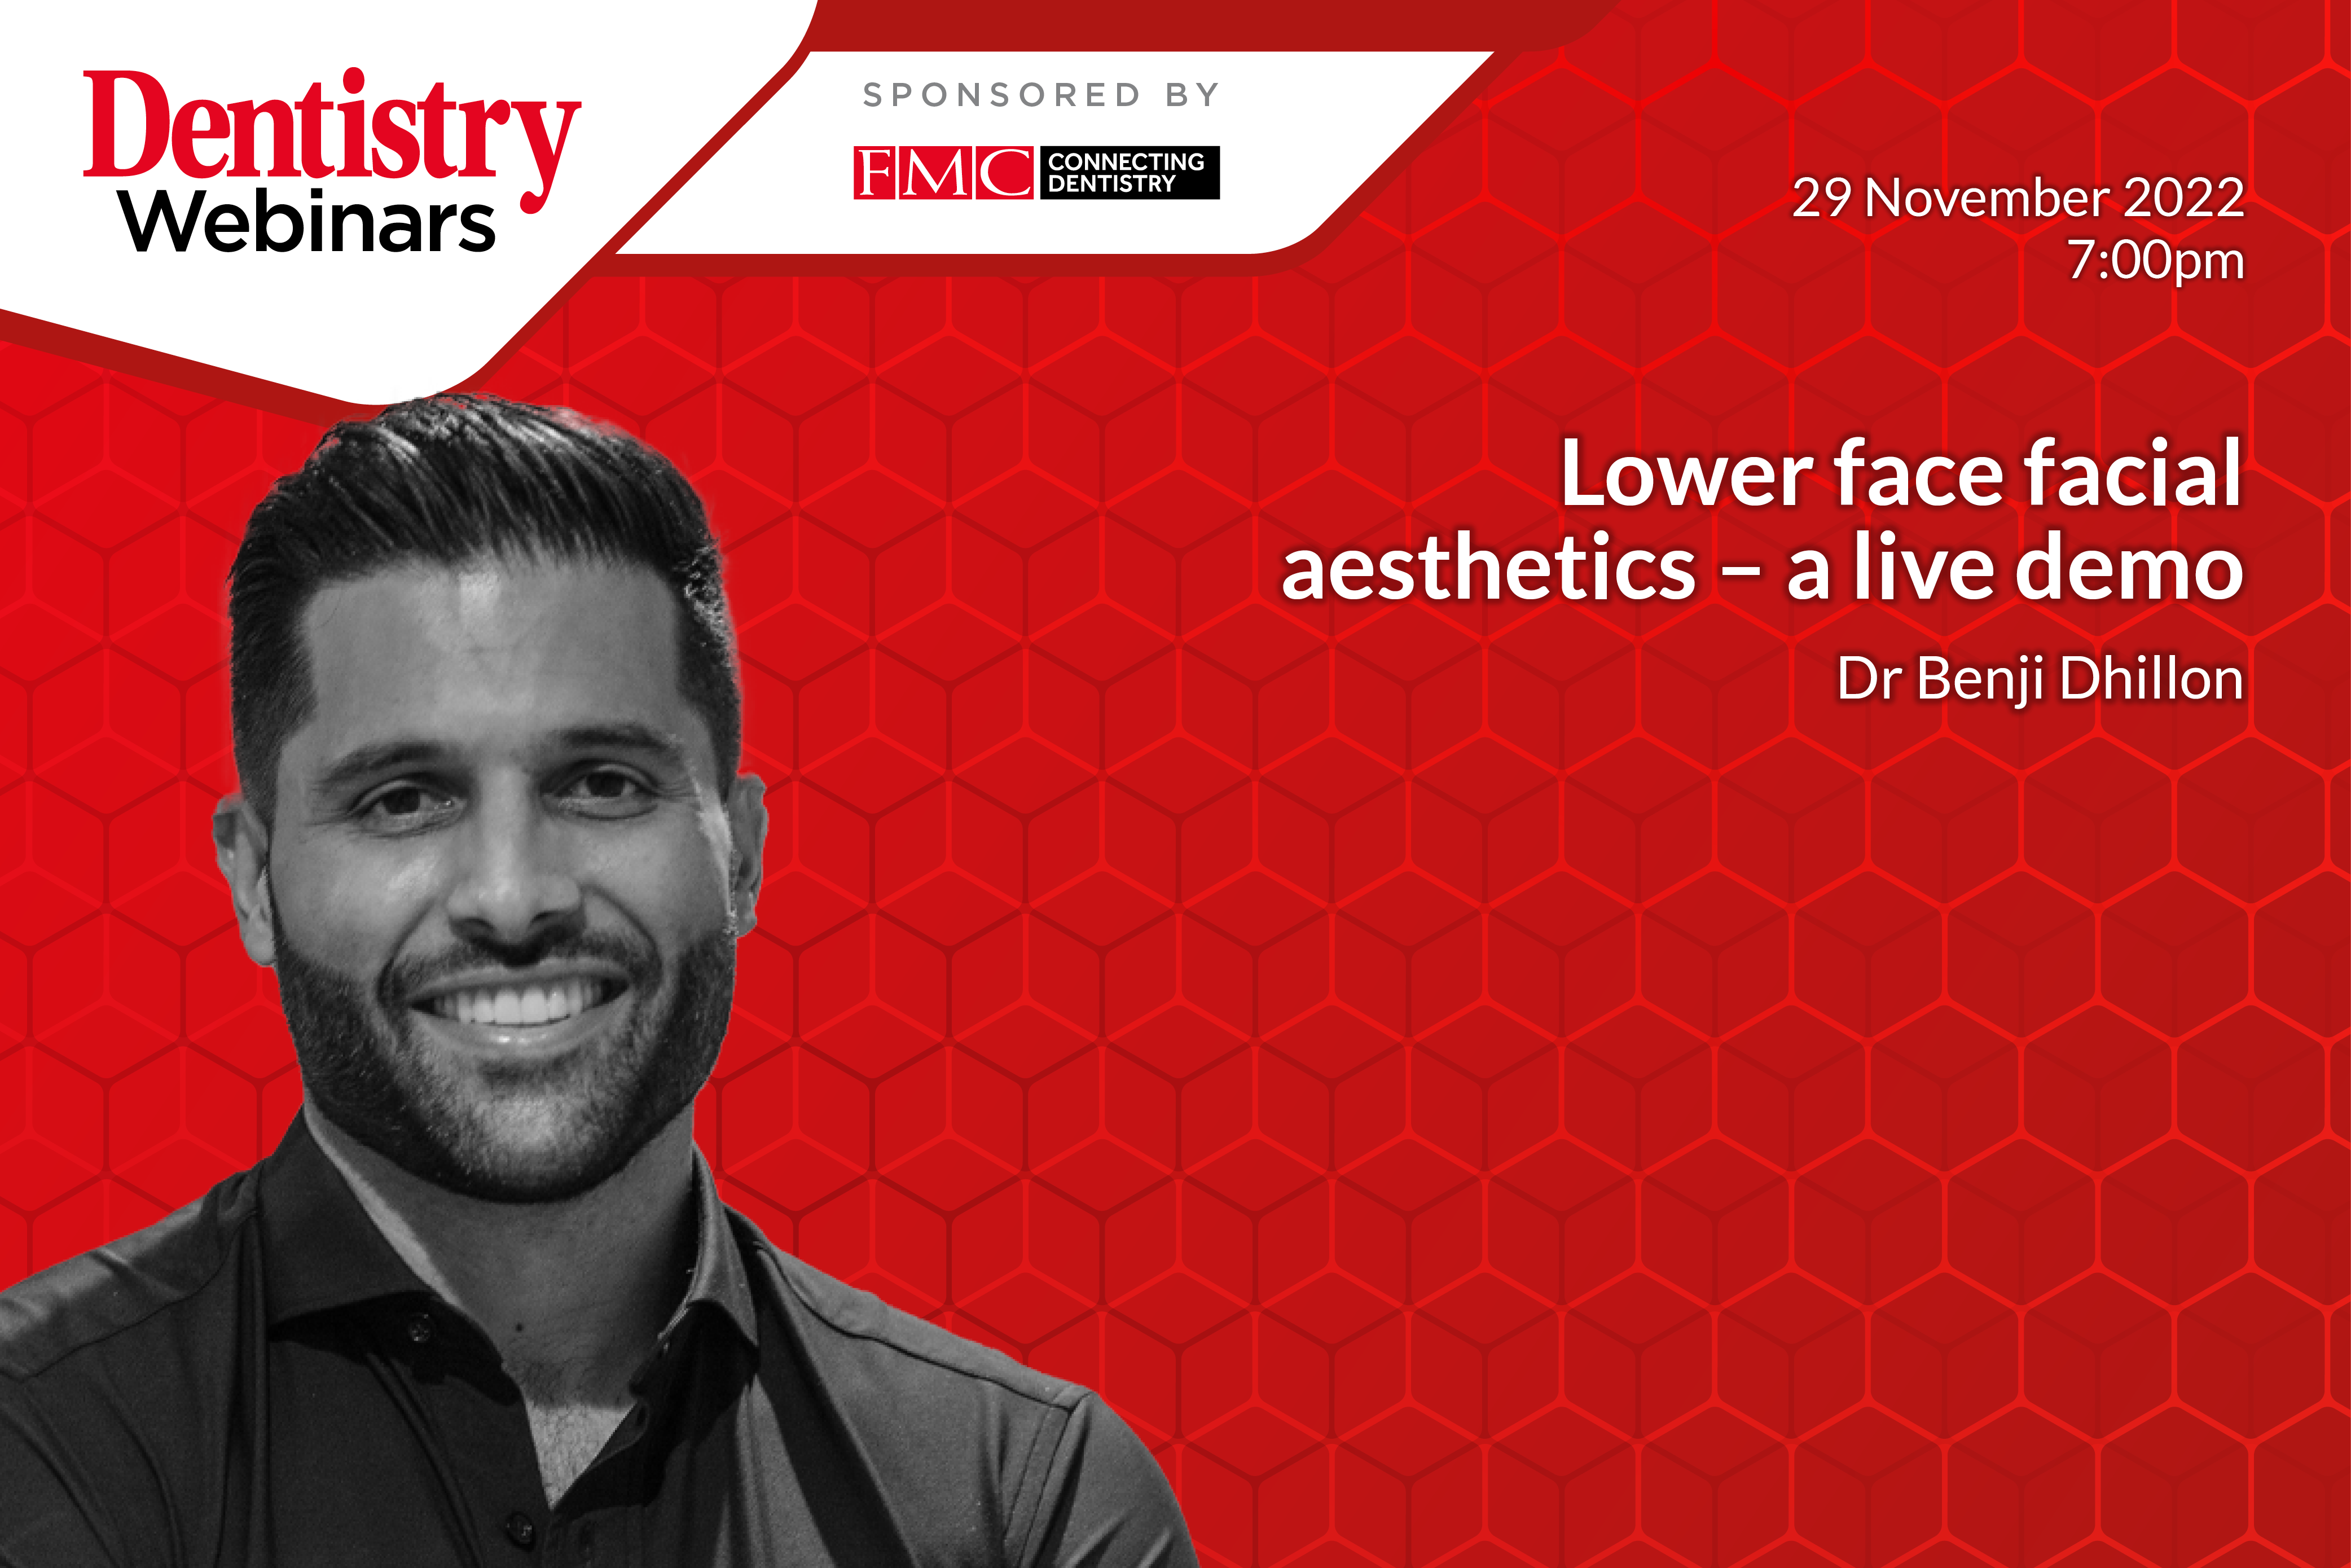 Join Benji Dhillon on Tuesday 29 November at 7pm for a live demo of lower face facial aesthetics – sign up now.